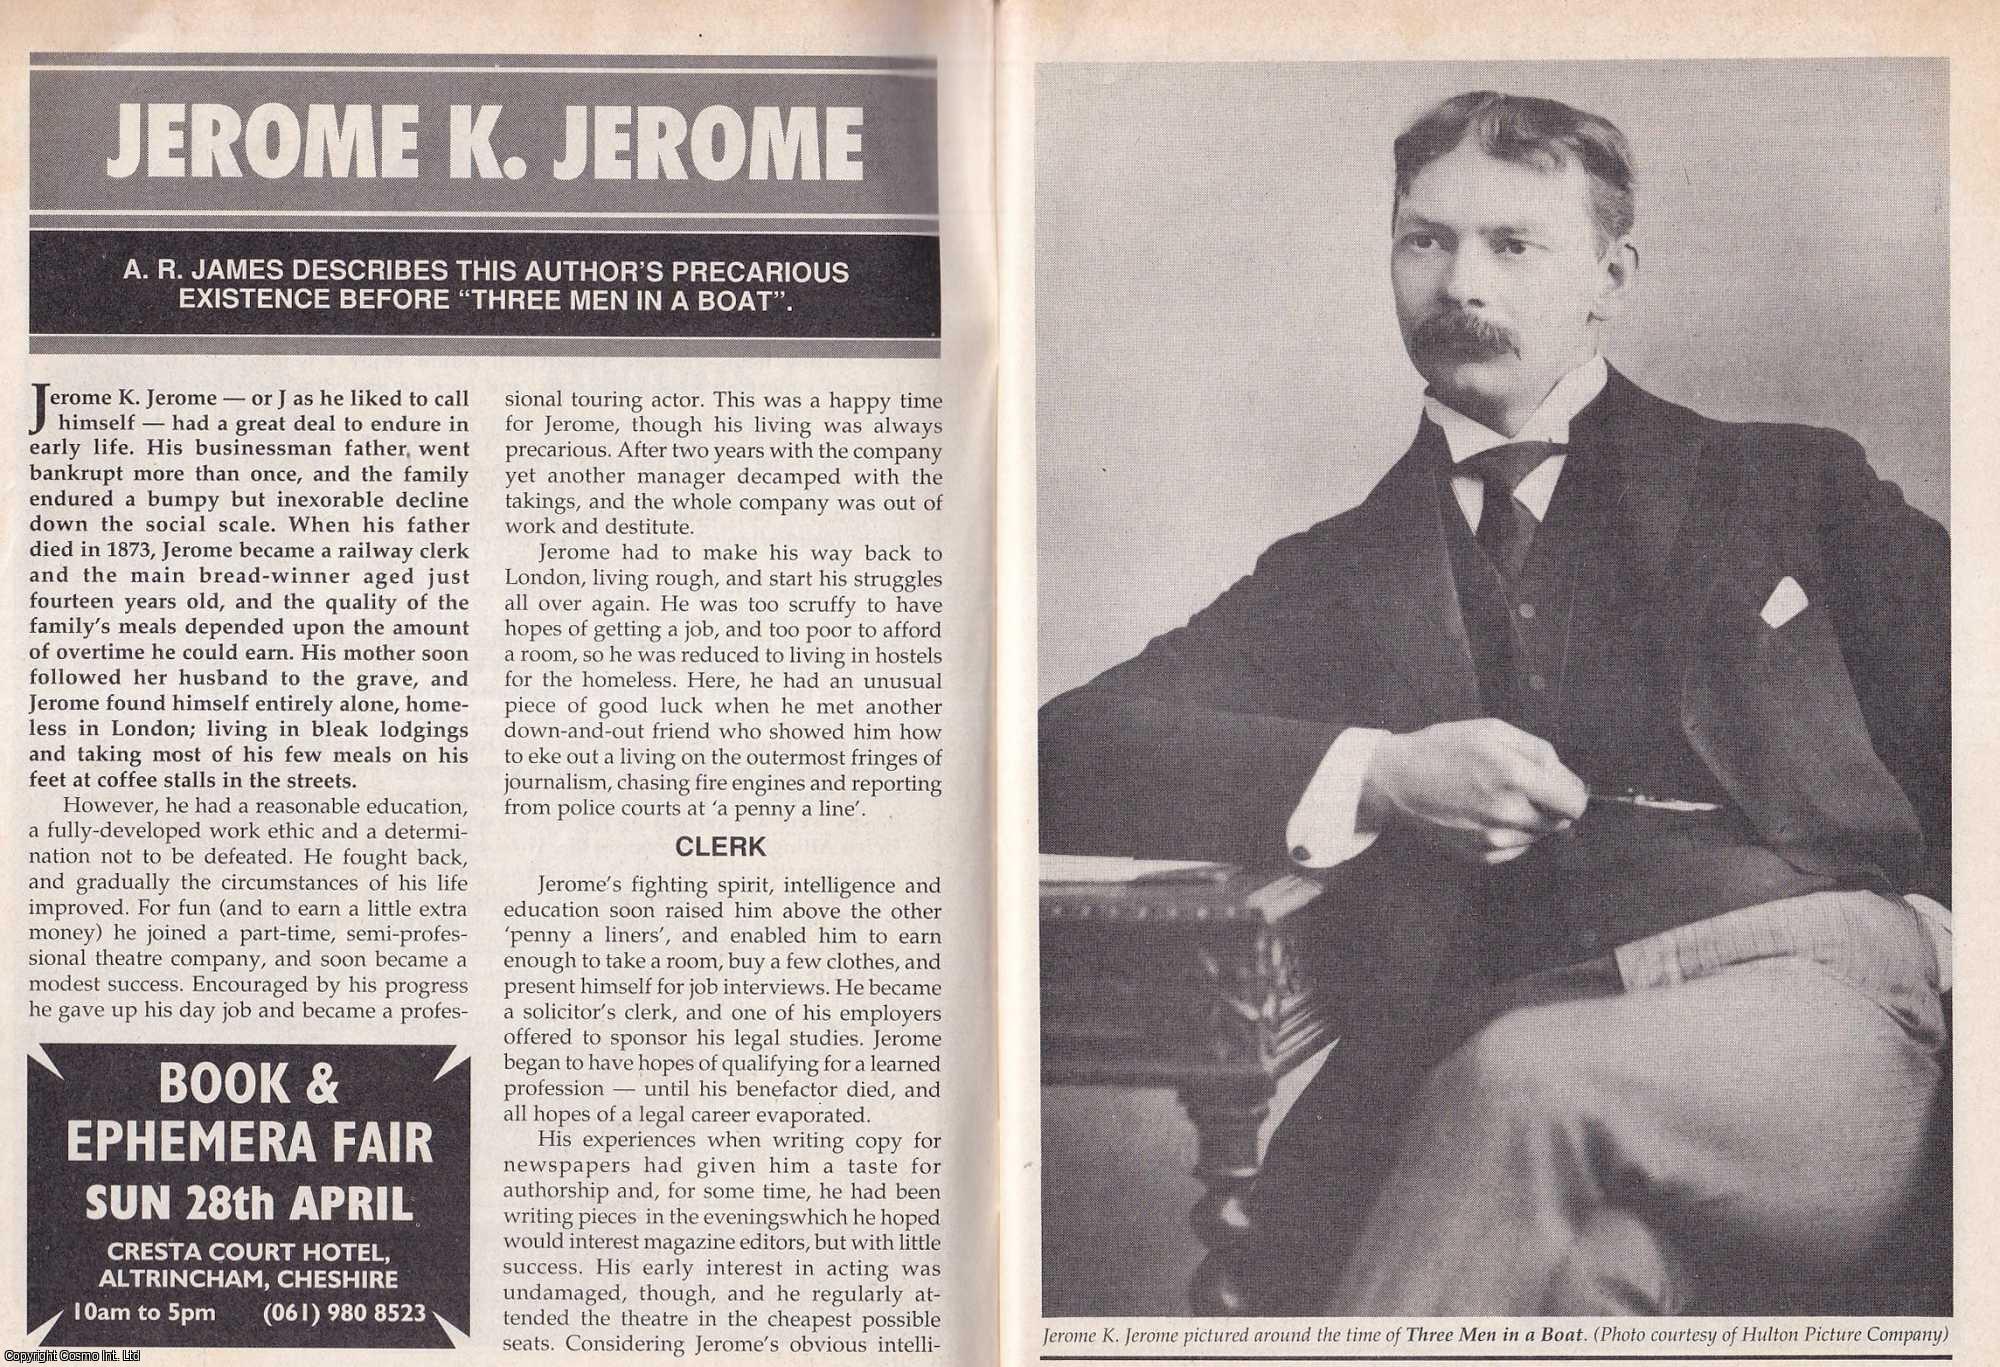 A. R. James - Jerome K. Jerome. The Author's Precarious Existence before Three Men in a Boat. This is an original article separated from an issue of The Book & Magazine Collector publication.